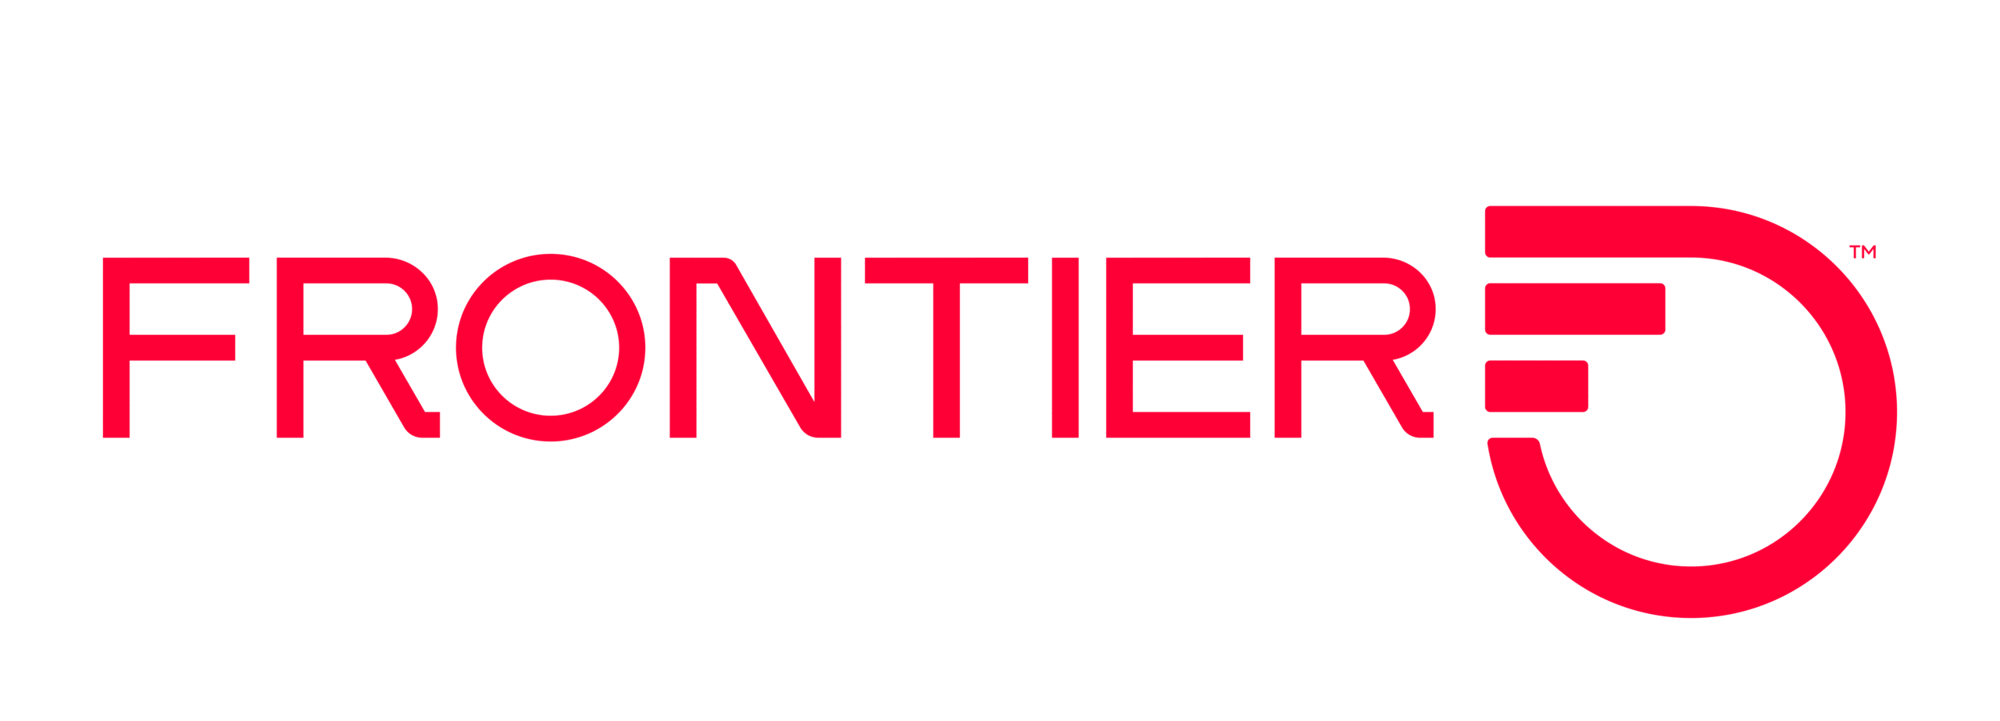 Frontier_SecondaryLogo_RGB_Red